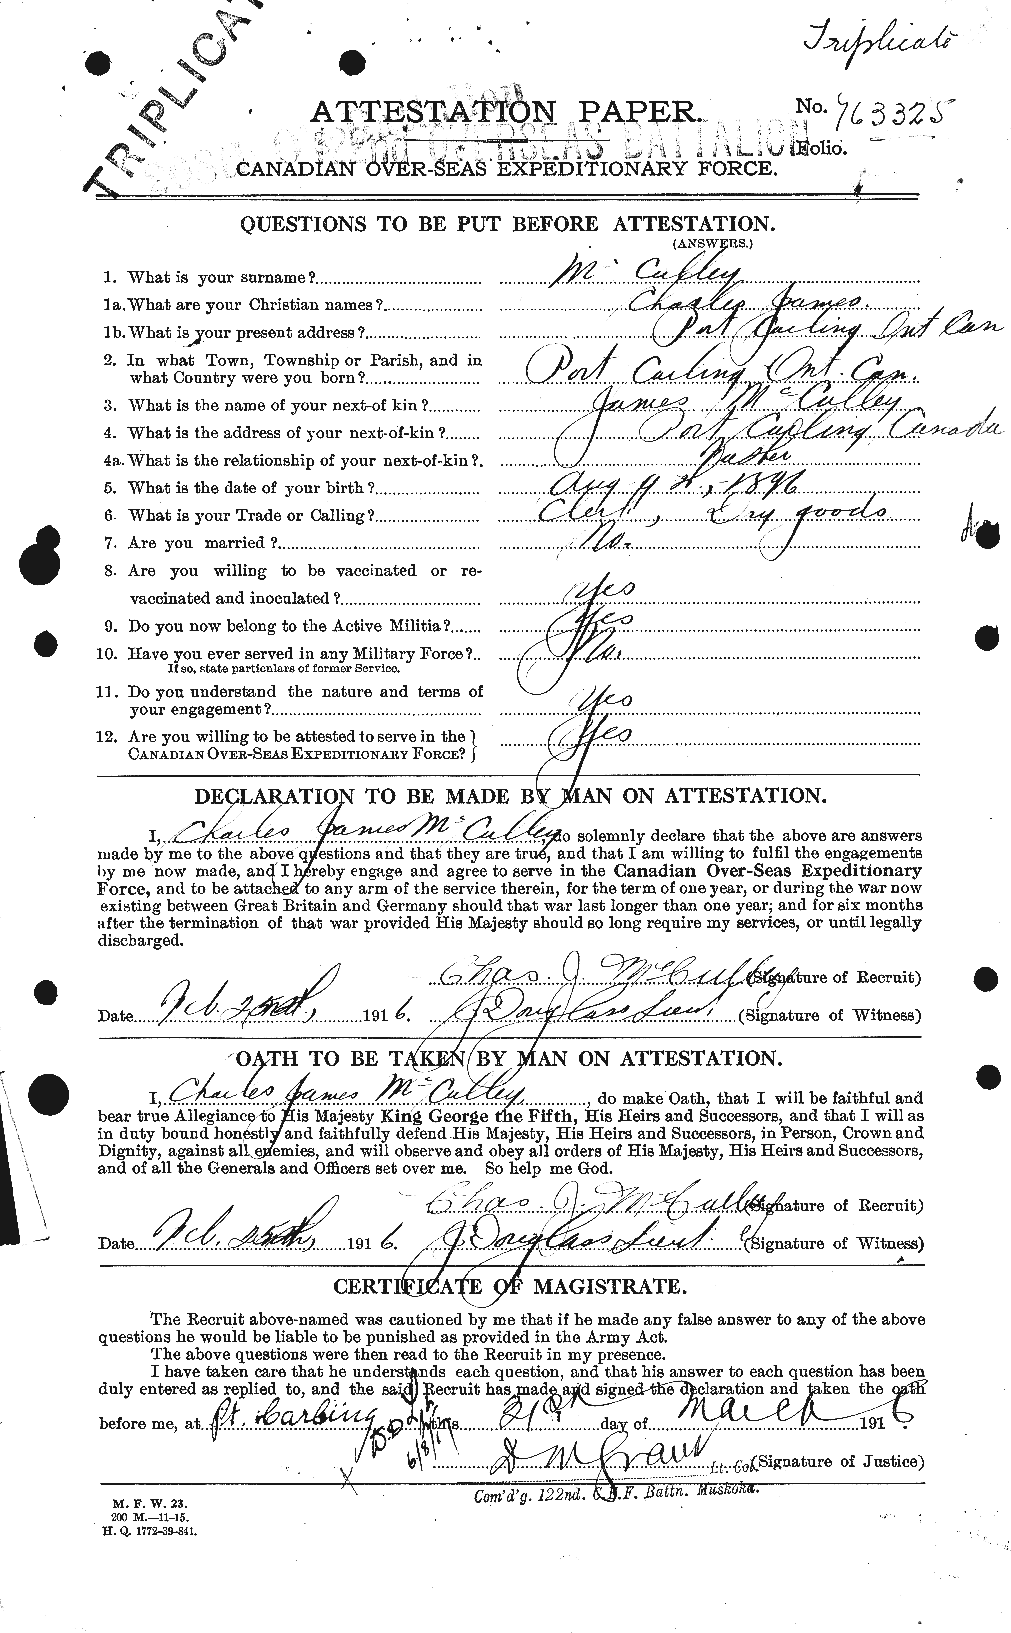 Personnel Records of the First World War - CEF 135407a